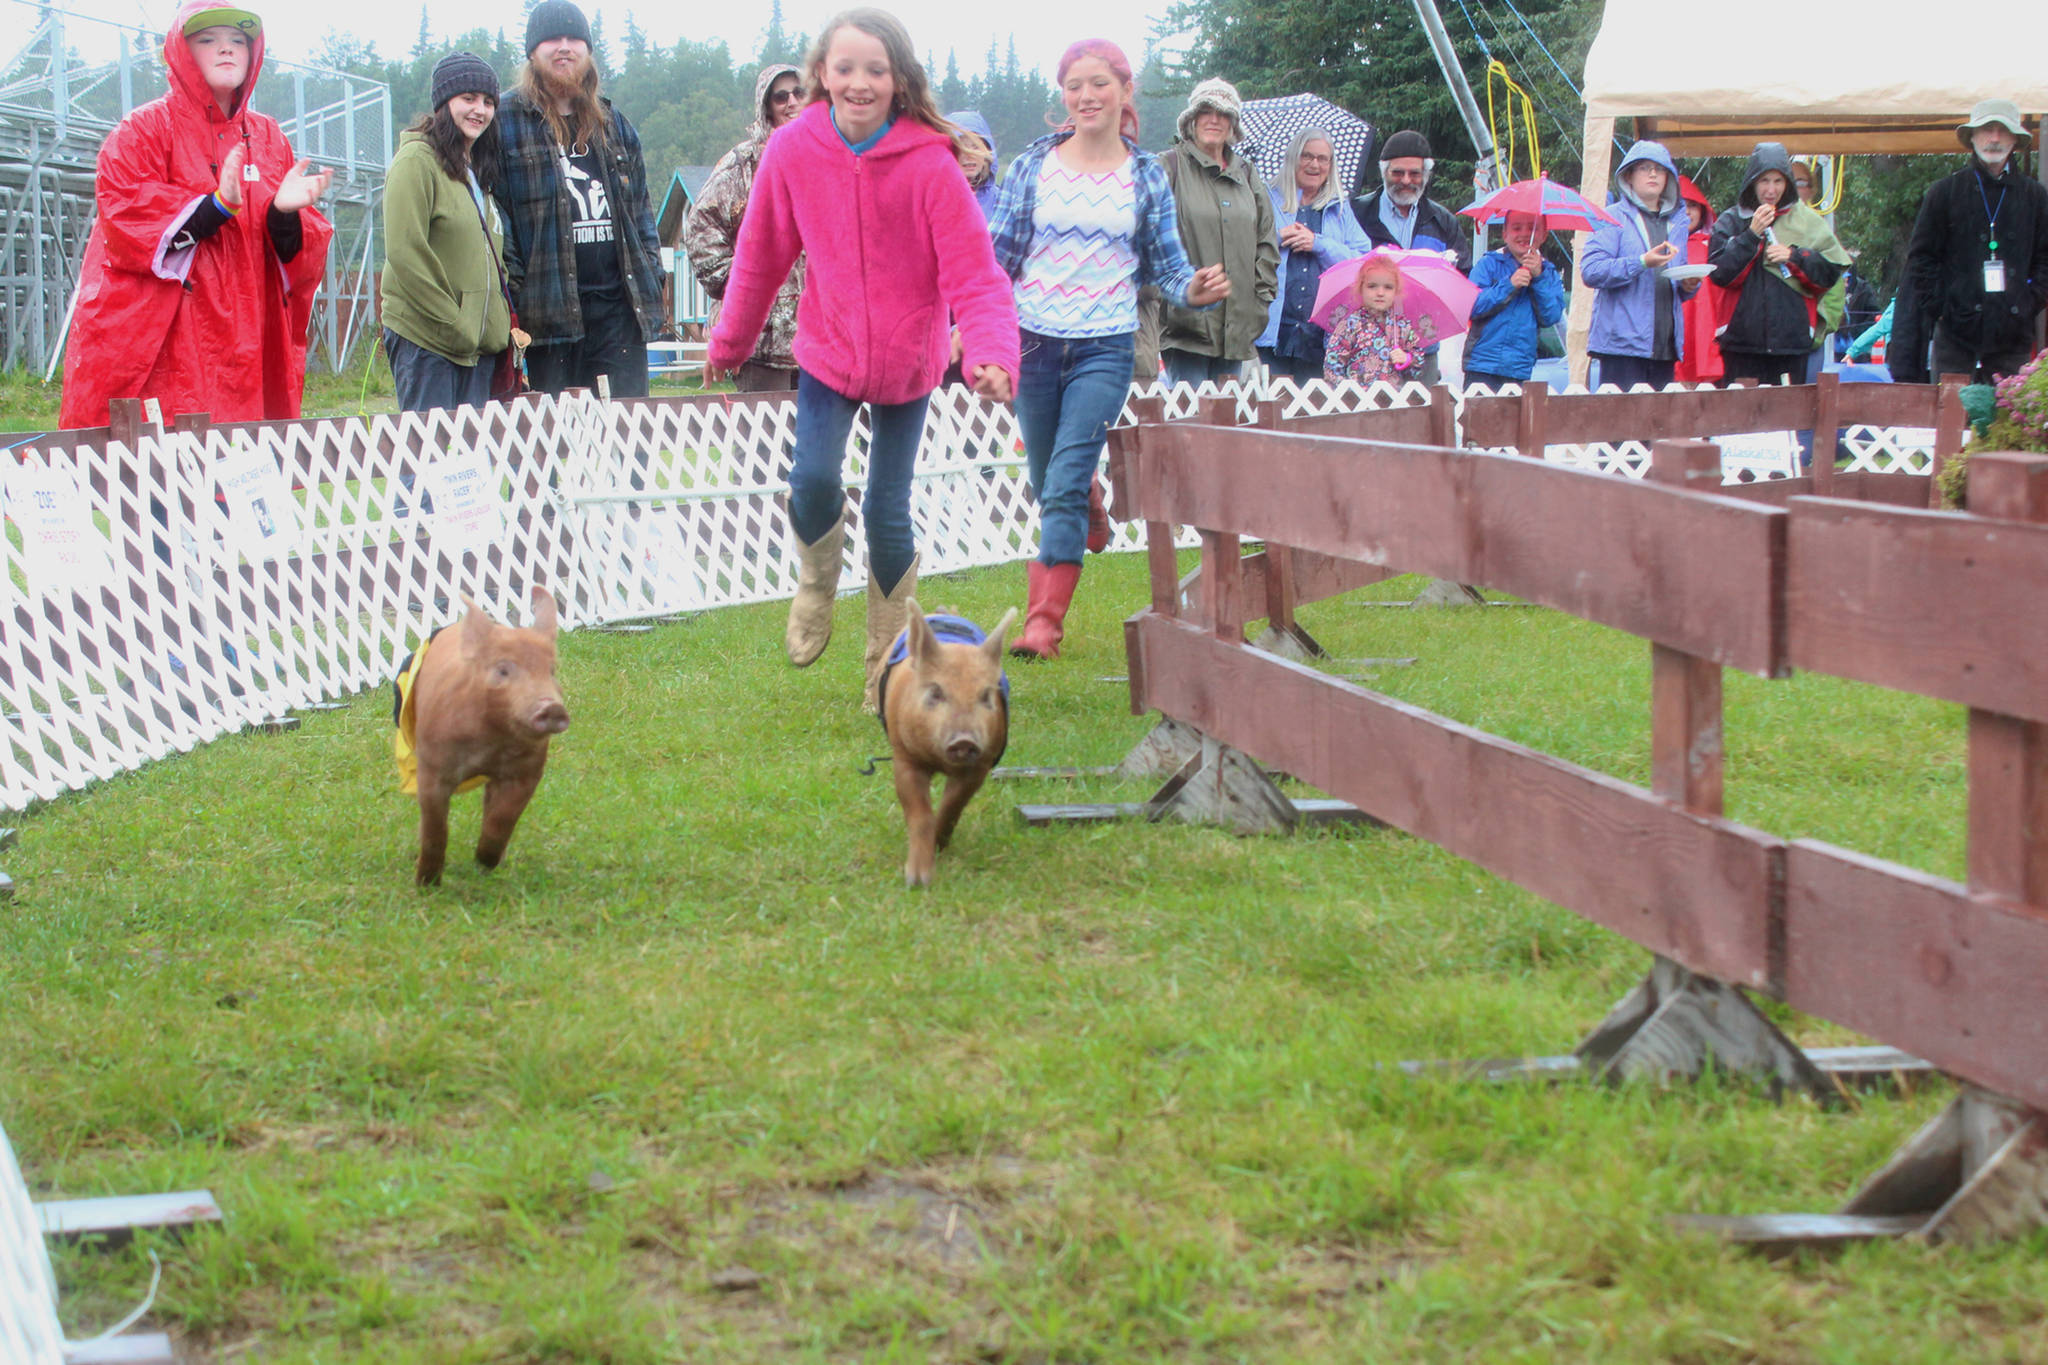 Trinity White, 10, and Alexa Richards, 12, chase pigs down the track during the pig races at the Kenai Peninsula Fair on Friday, Aug. 18, 2017 in Ninilchik, Alaska. Race organizers need volunteer chasers to keep the pigs going in the right direction. (Photo by Megan Pacer/Homer News, file)